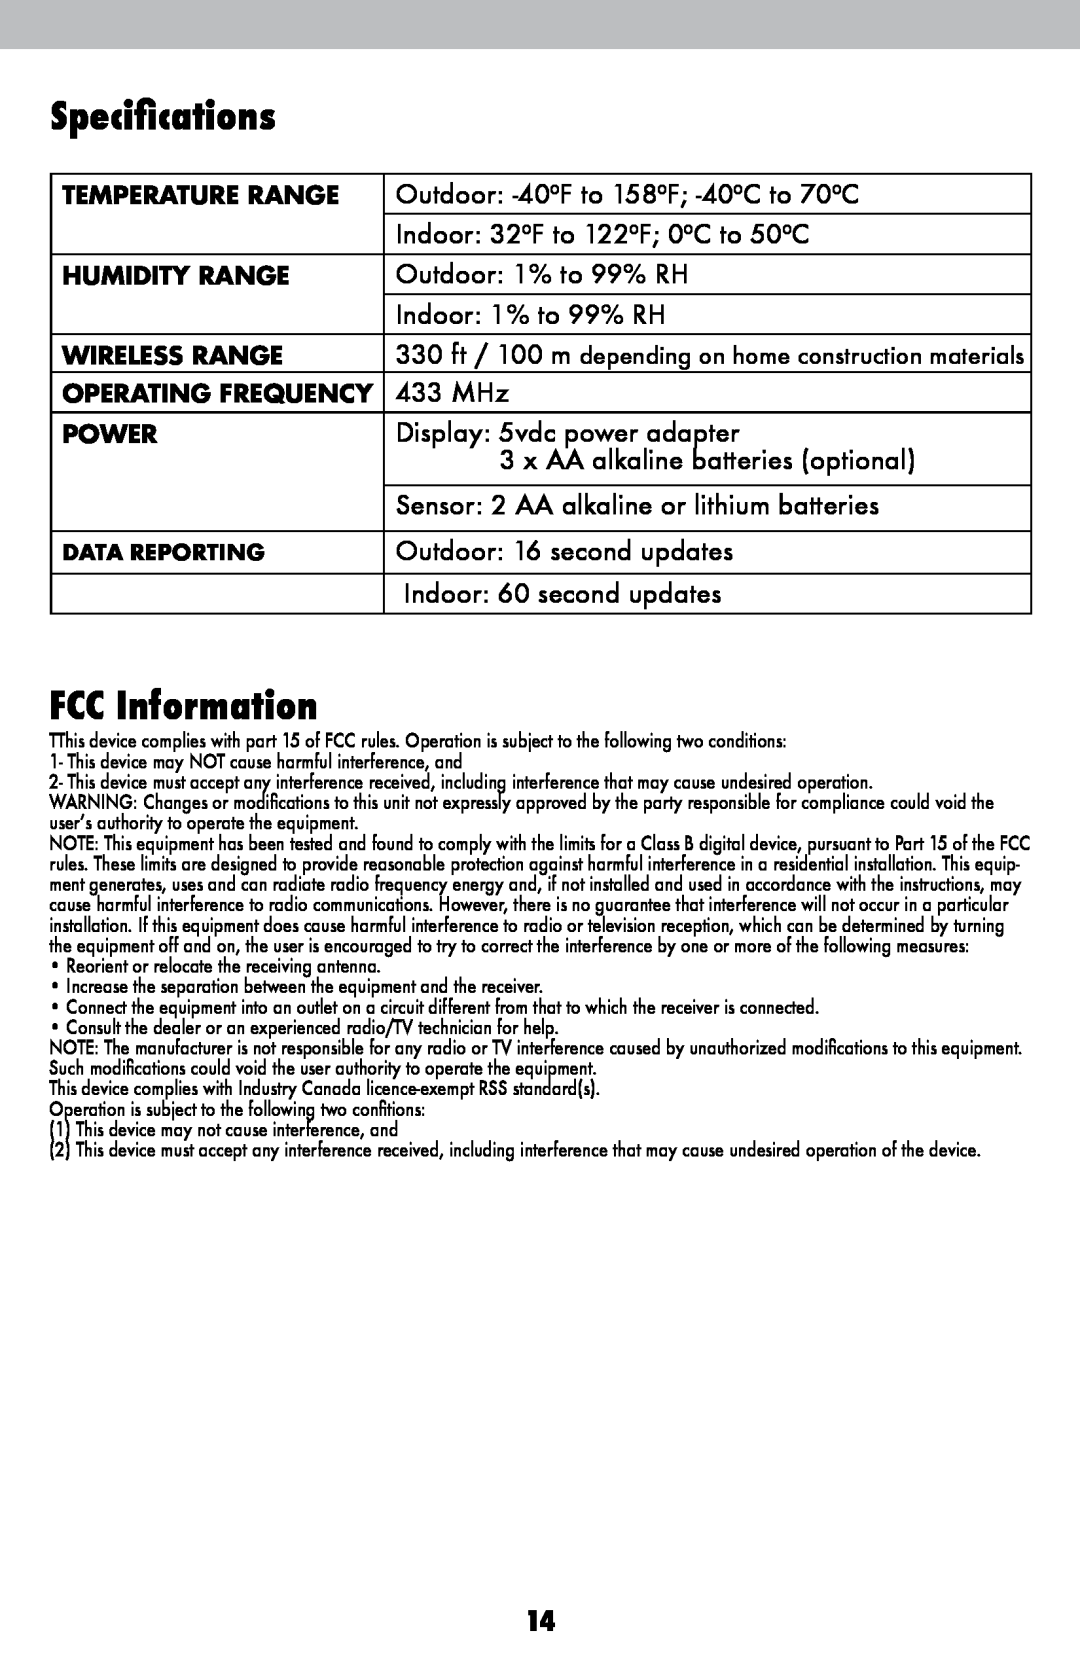 Acu-Rite 2048 instruction manual Specifications, FCC Information 